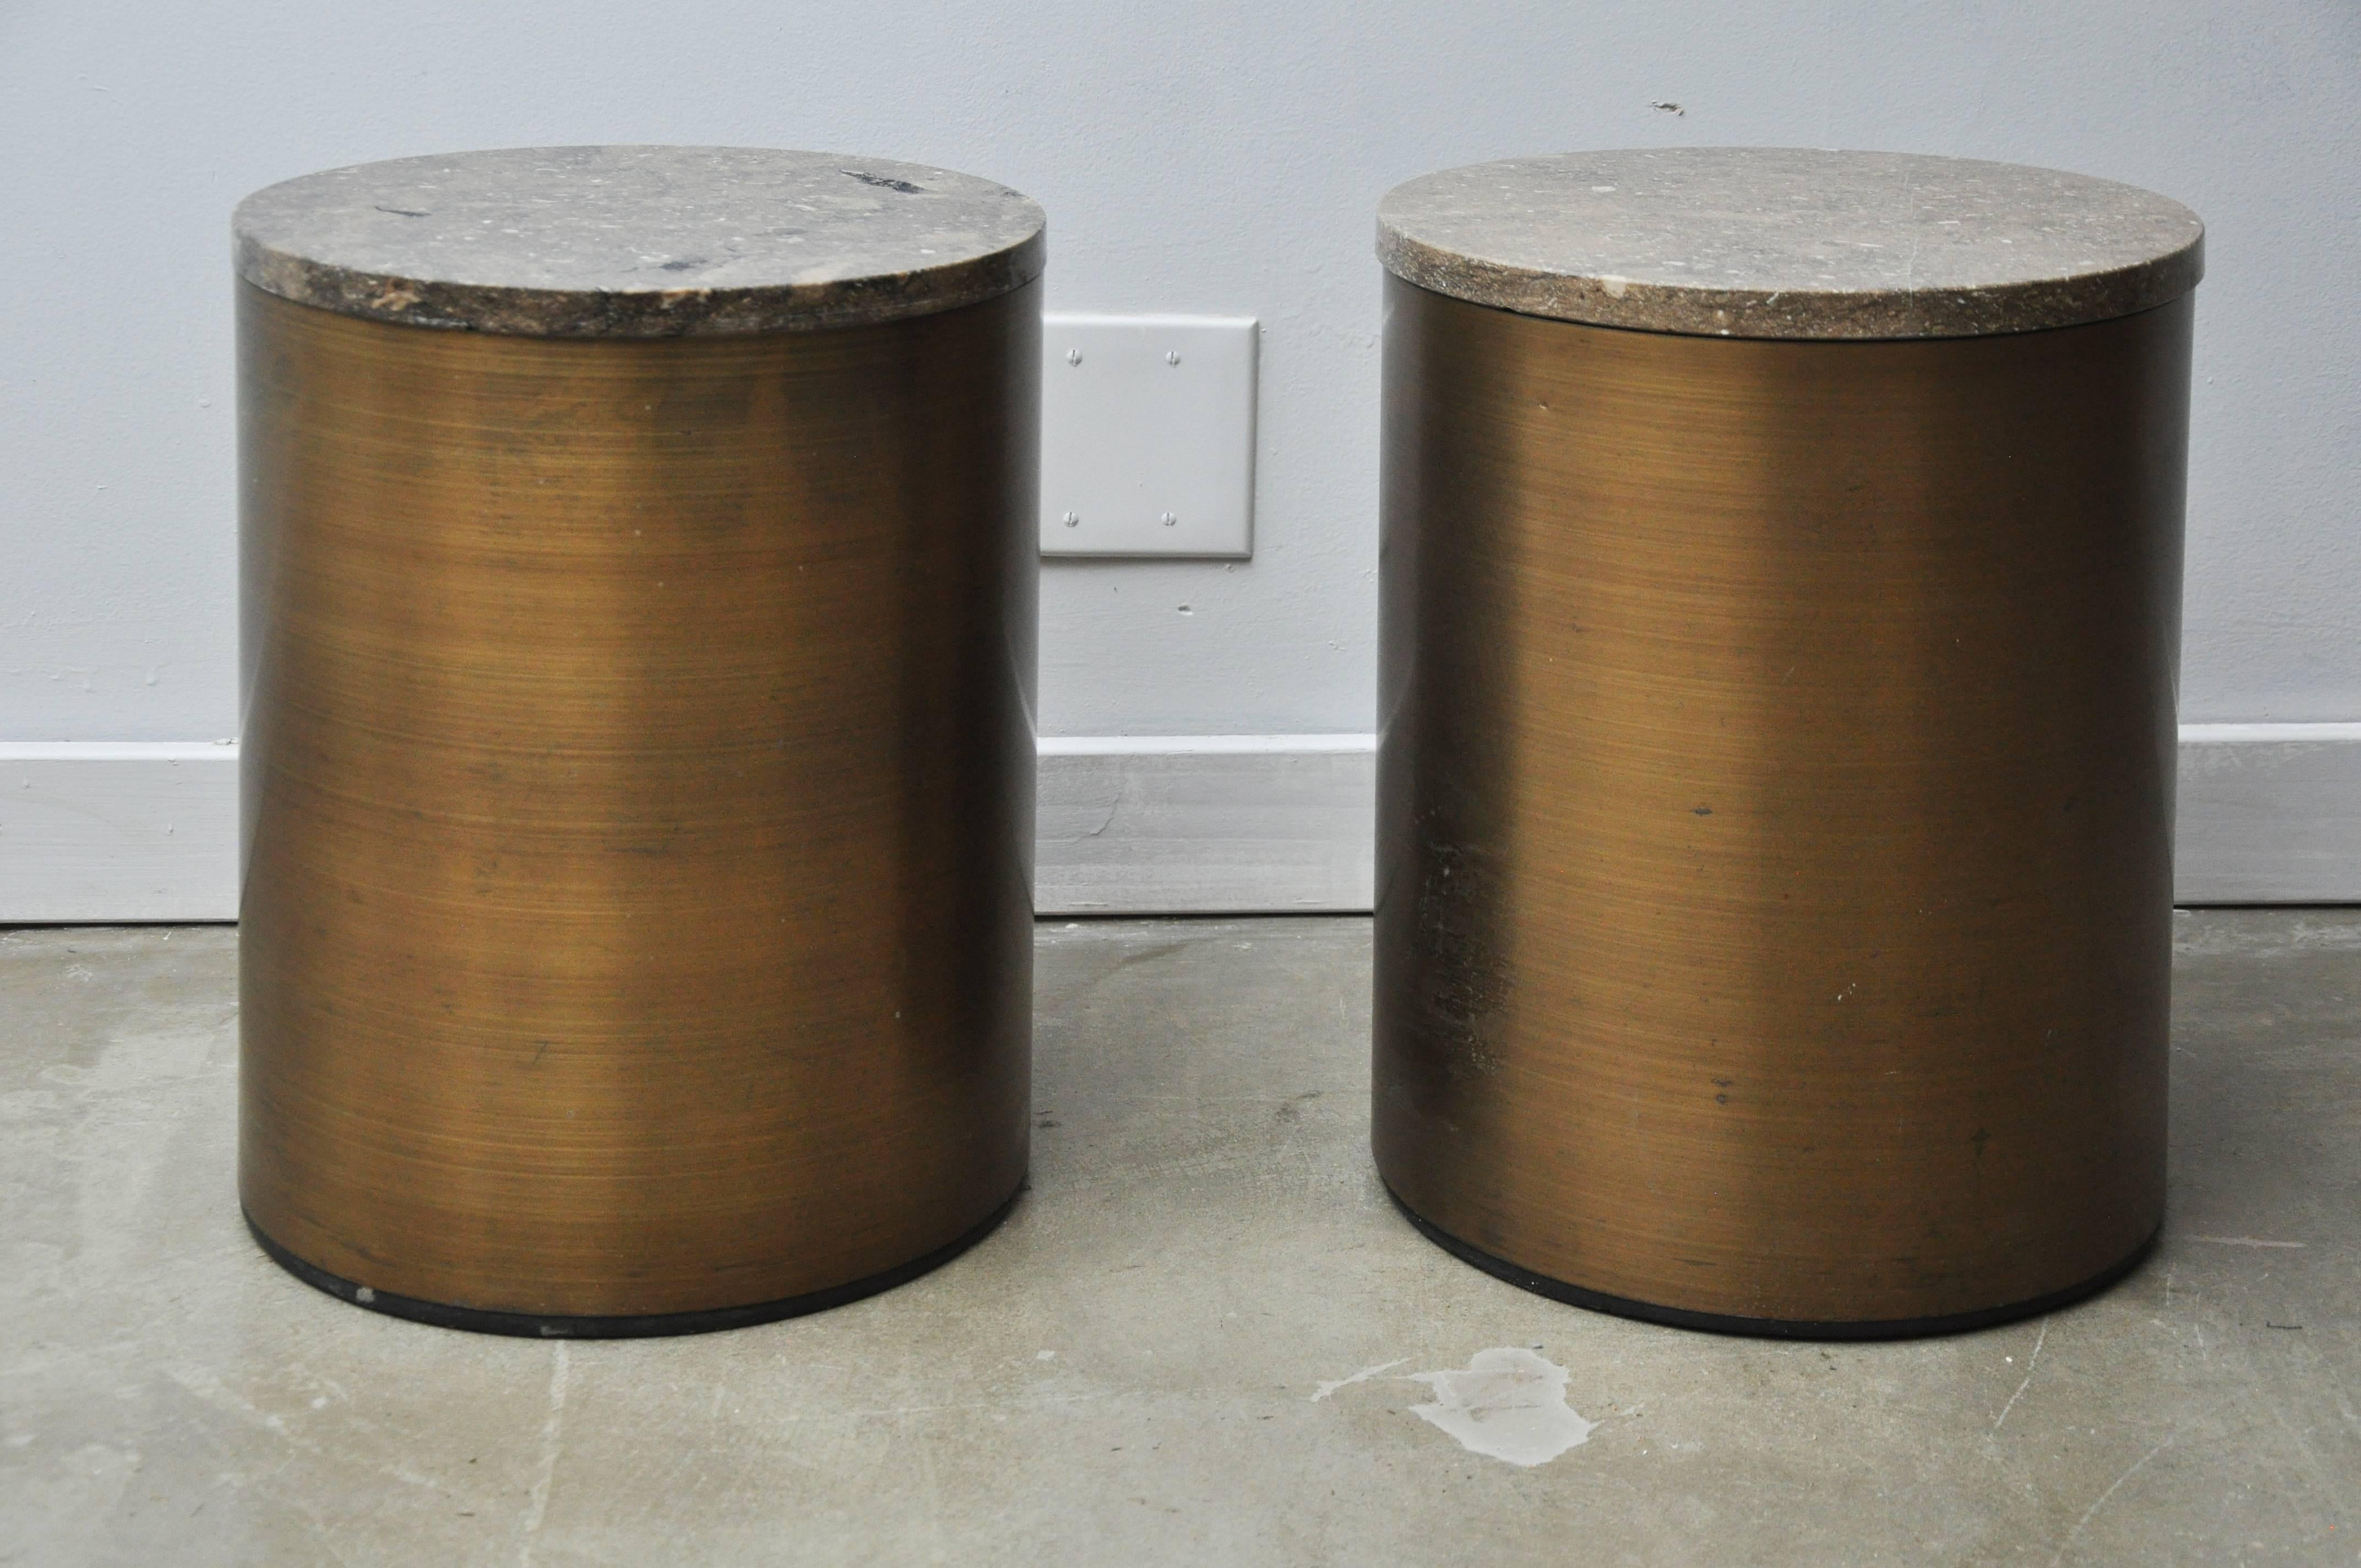 Bronze tone side tables by Paul Mayan. Each piece has a travertine top.